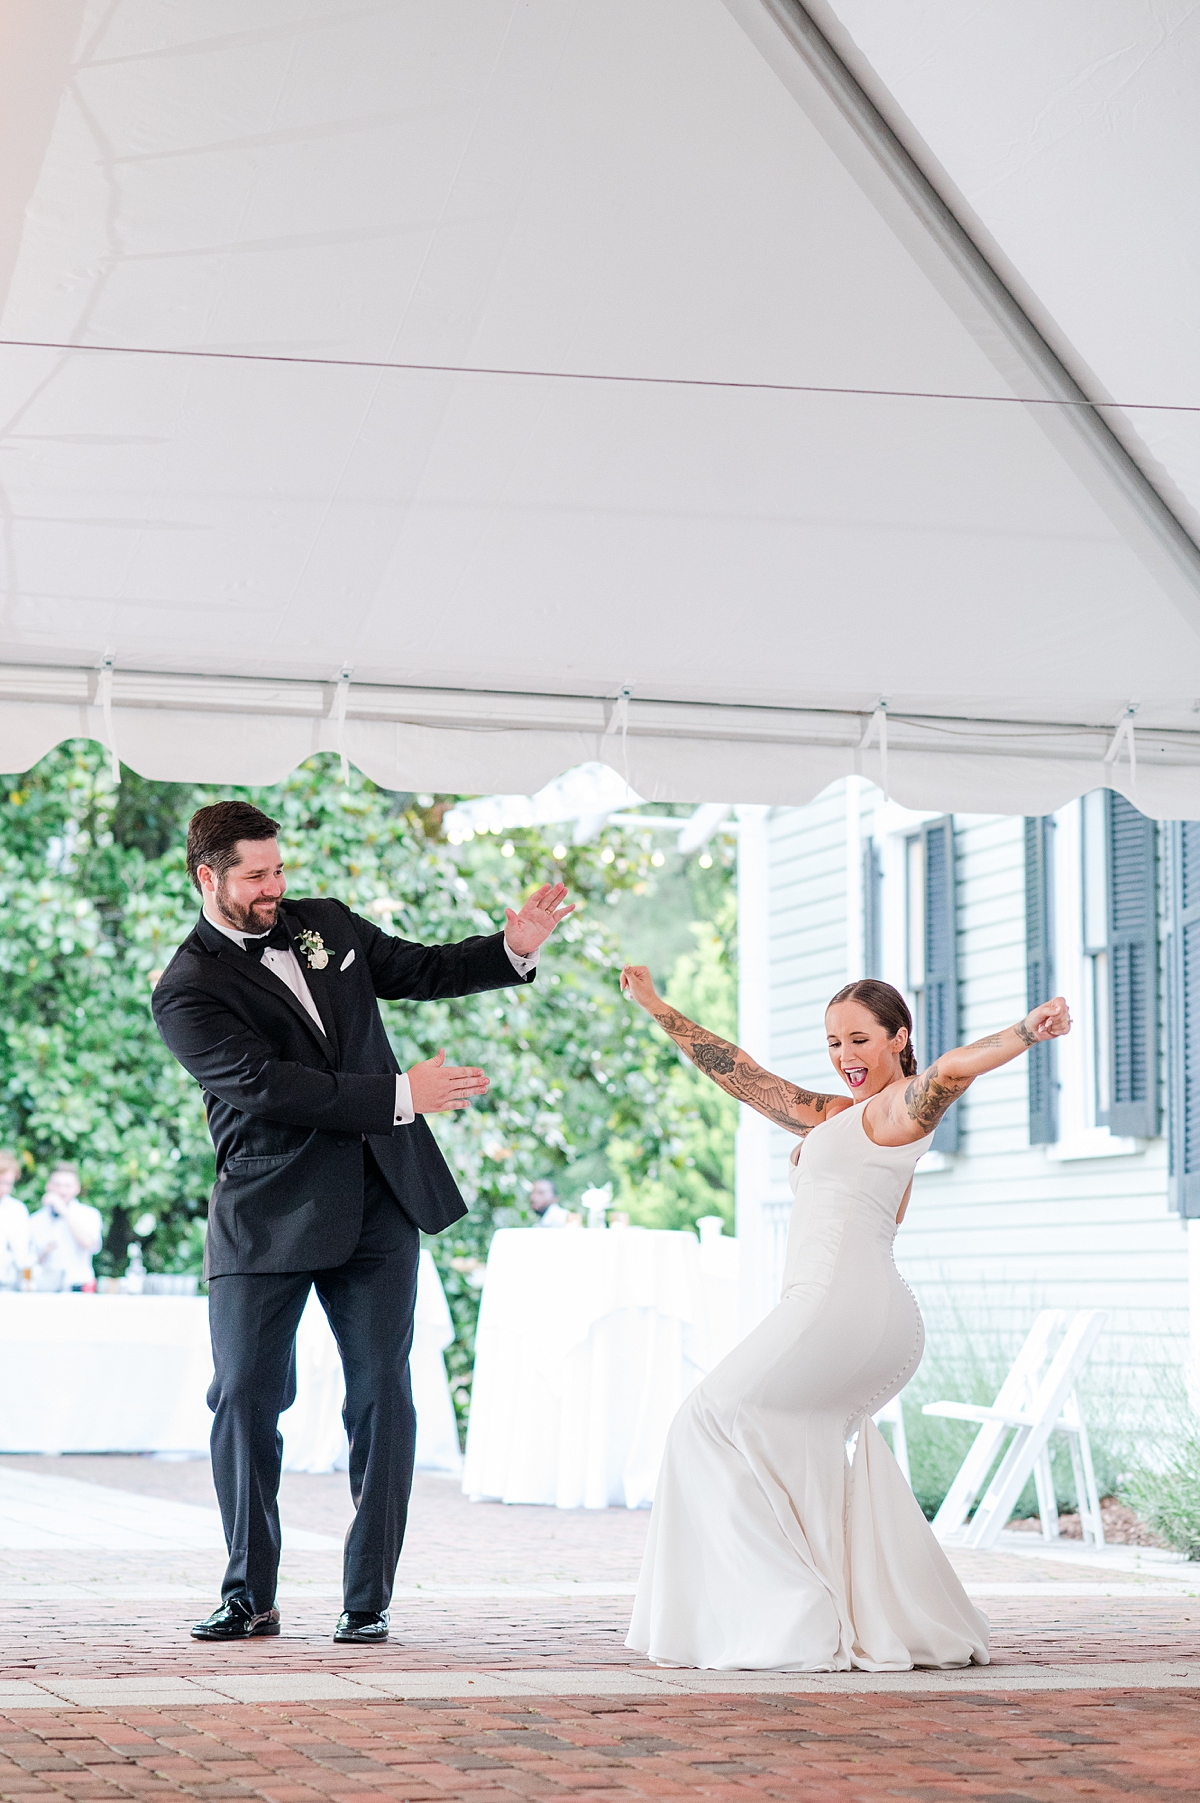 Bride and Groom Reception Entrance During Lewis Ginter Botanical Garden Wedding. Wedding Photography by Virginia Wedding Photographer Kailey Brianne Photography. 